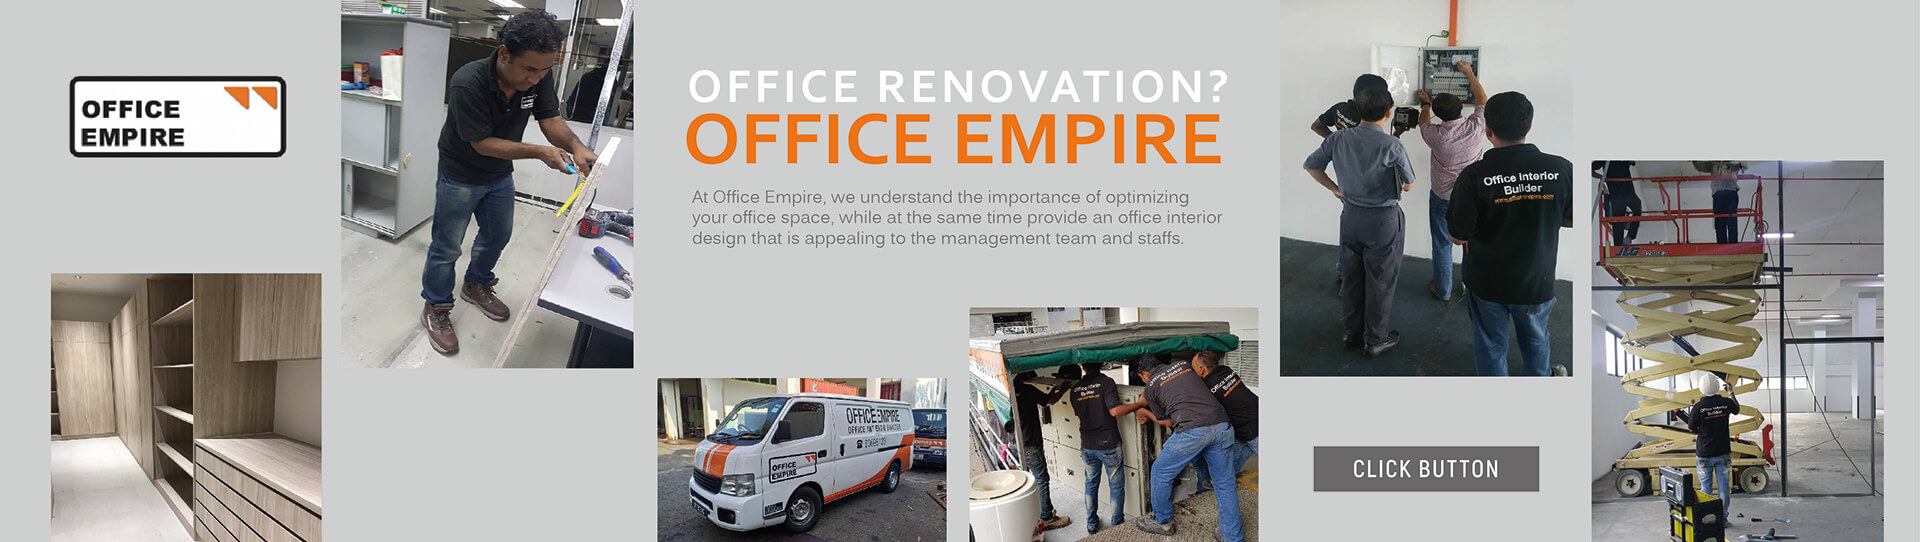 Office Renovation Contractor Singapore Commercial Renovation Singapore